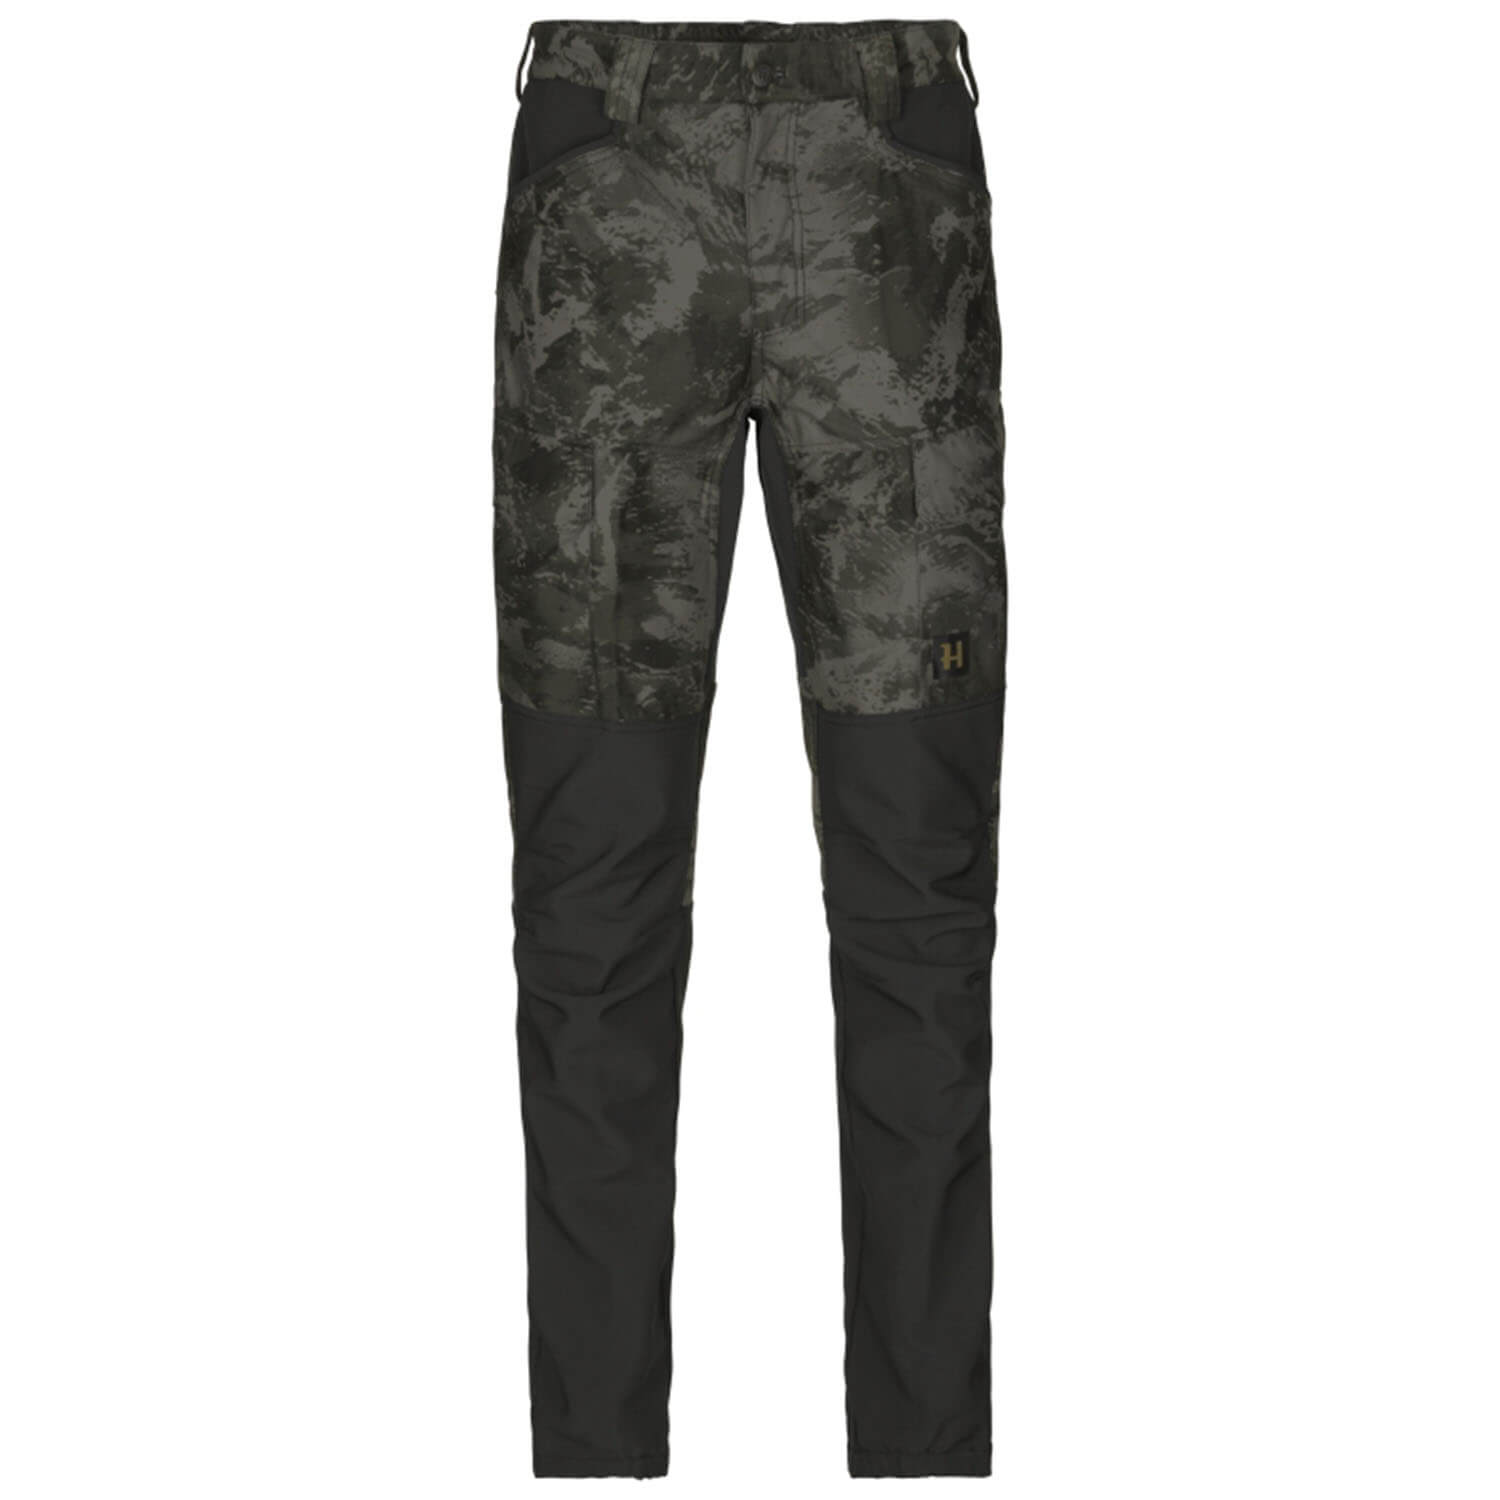 Härkila hunting trousers Noctyx Camo Silent - Camouflage Trousers